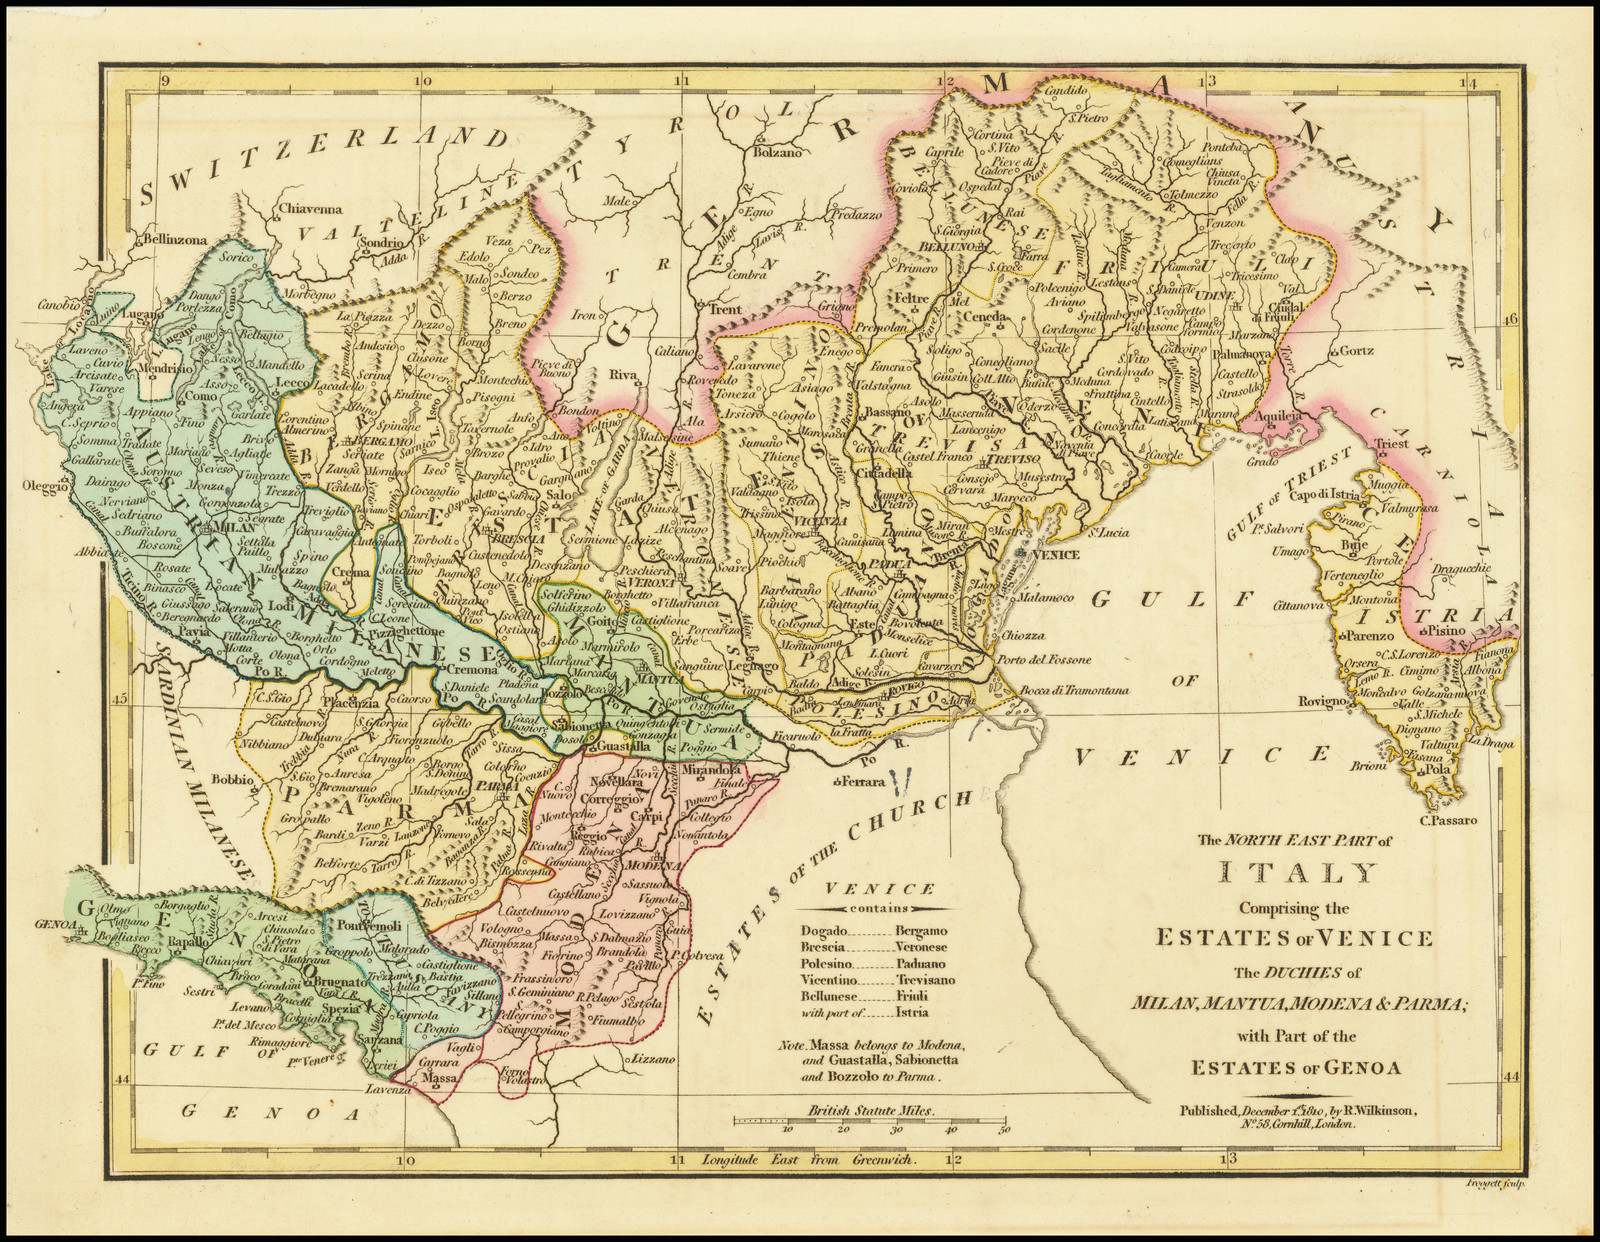 The North East Part of Italy, Comprising the Estates of Venice, The Dutchies of Milan, Mantua, Modena & Parma; with Part of the Estates of Genoa, From the Best Authorities